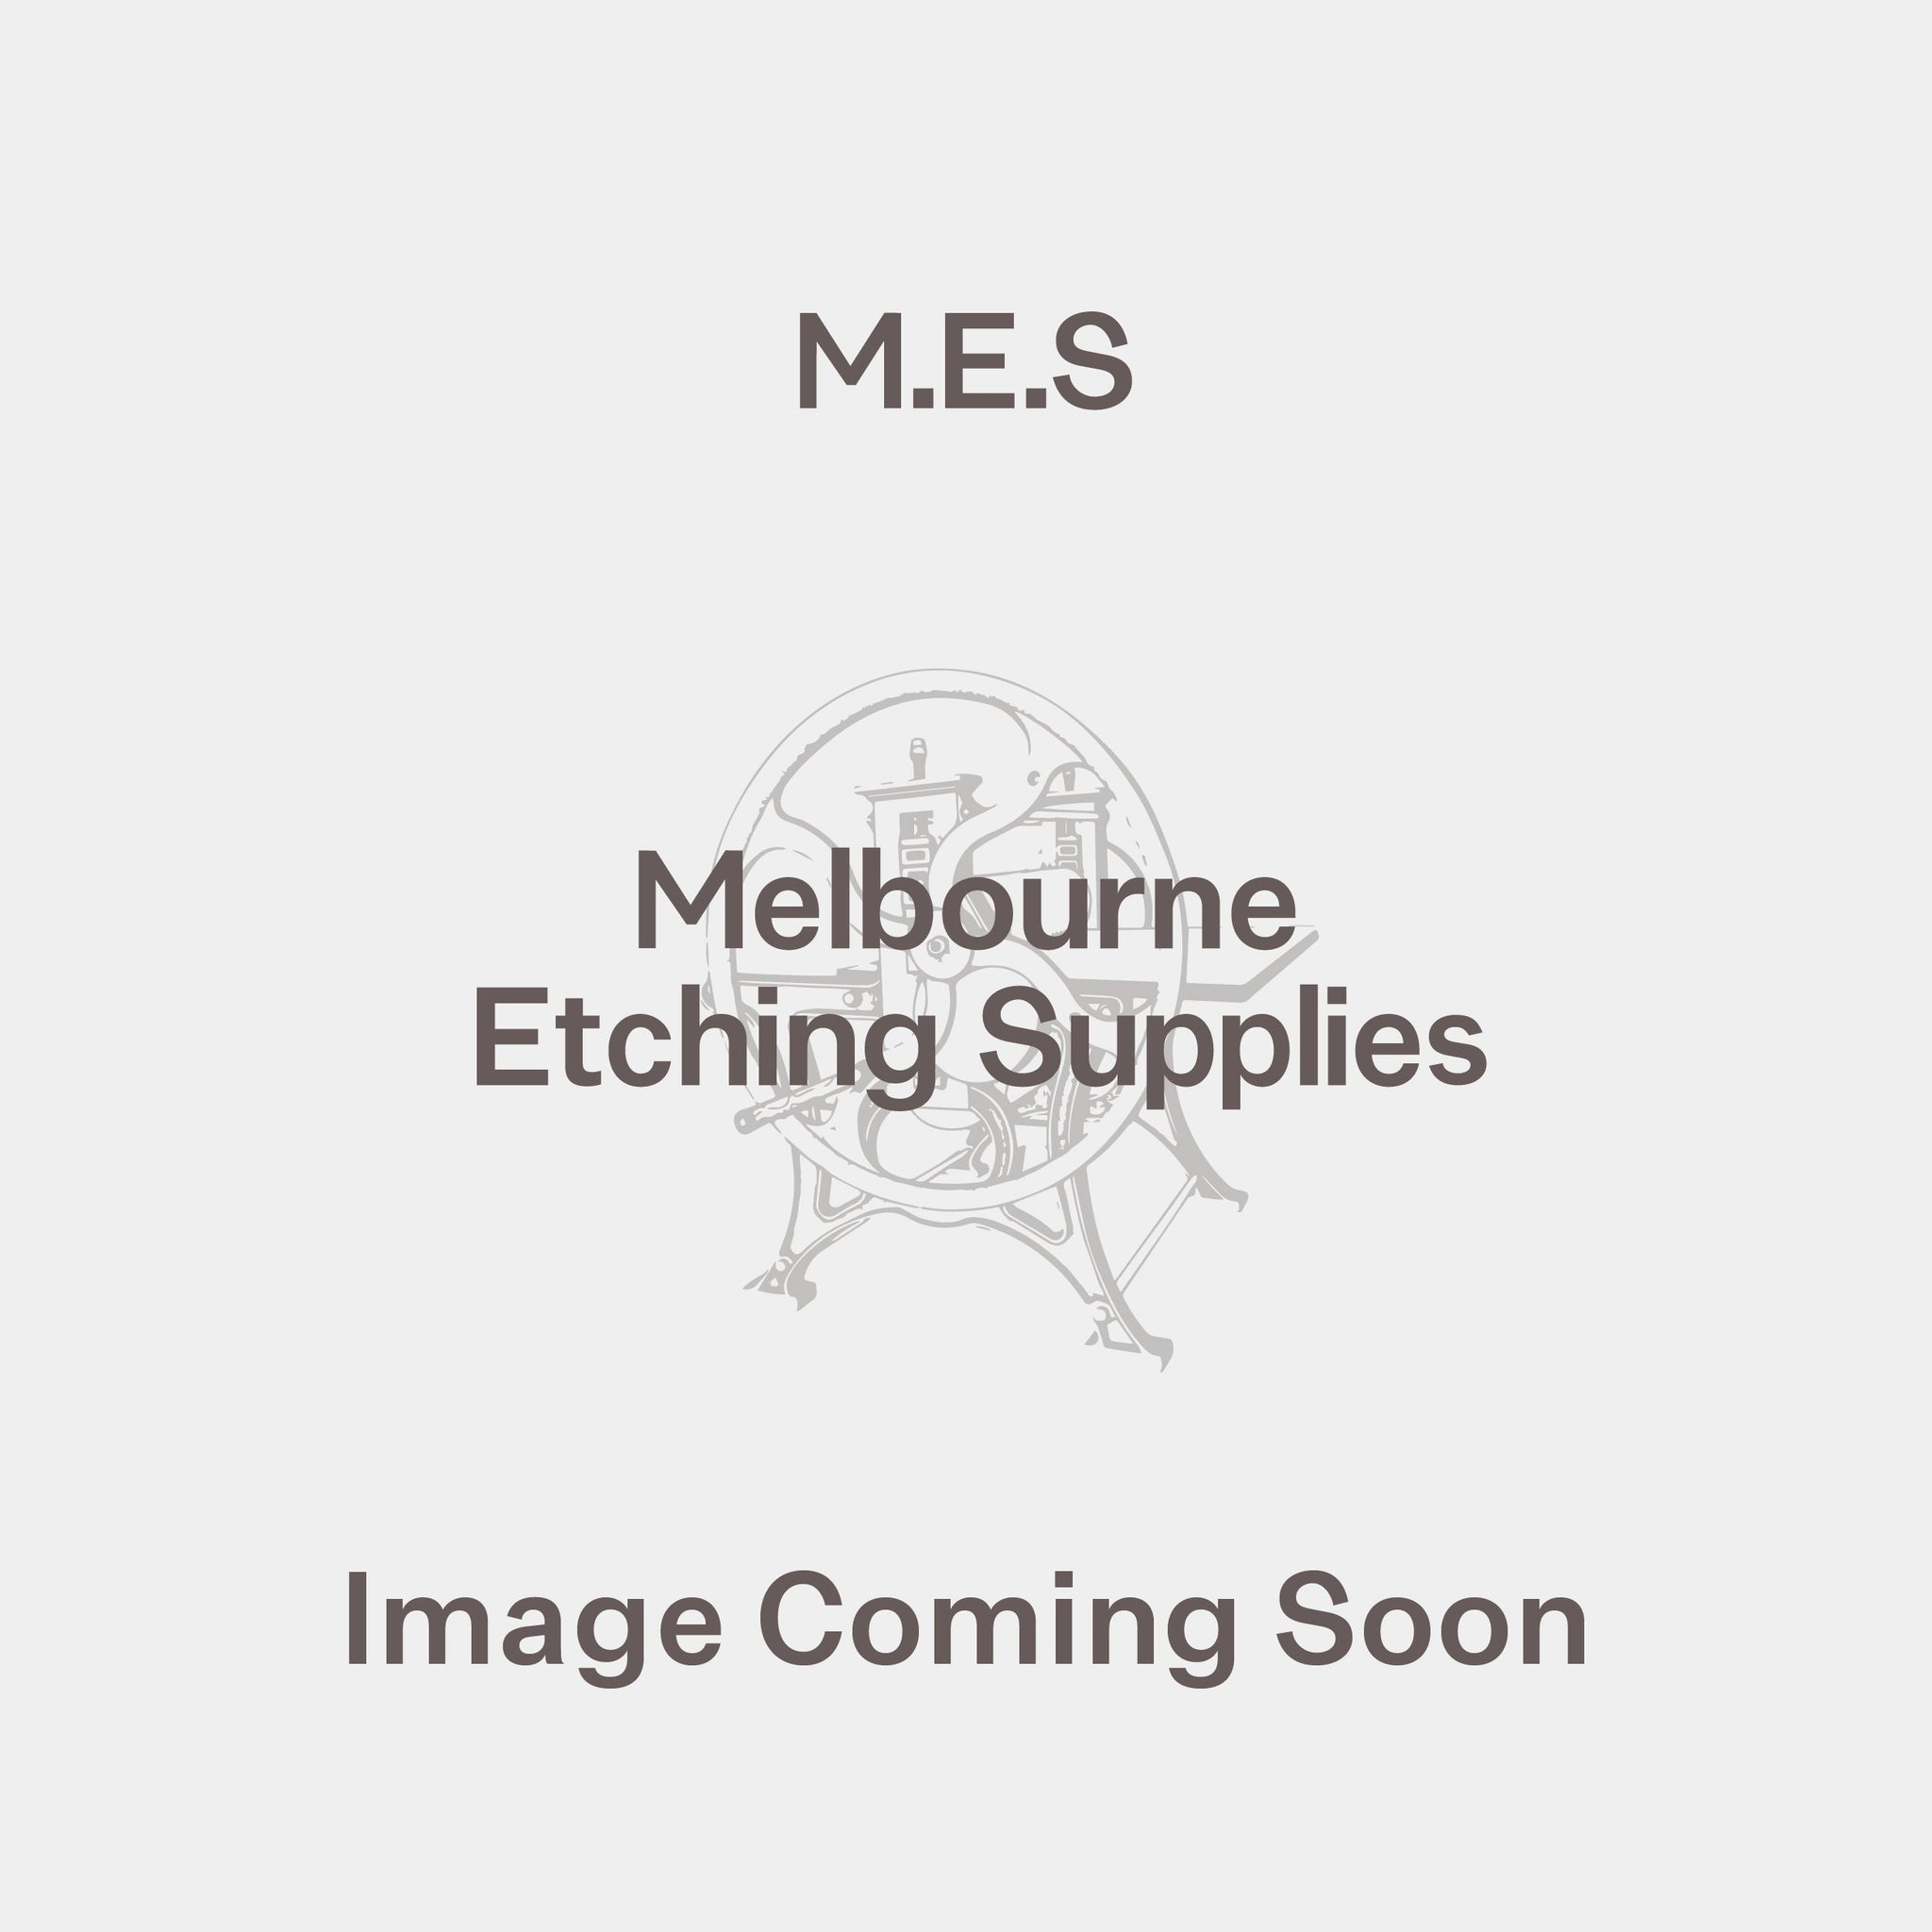 MG Litho 100 gsm 51x76 - Melbourne Etching Supplies